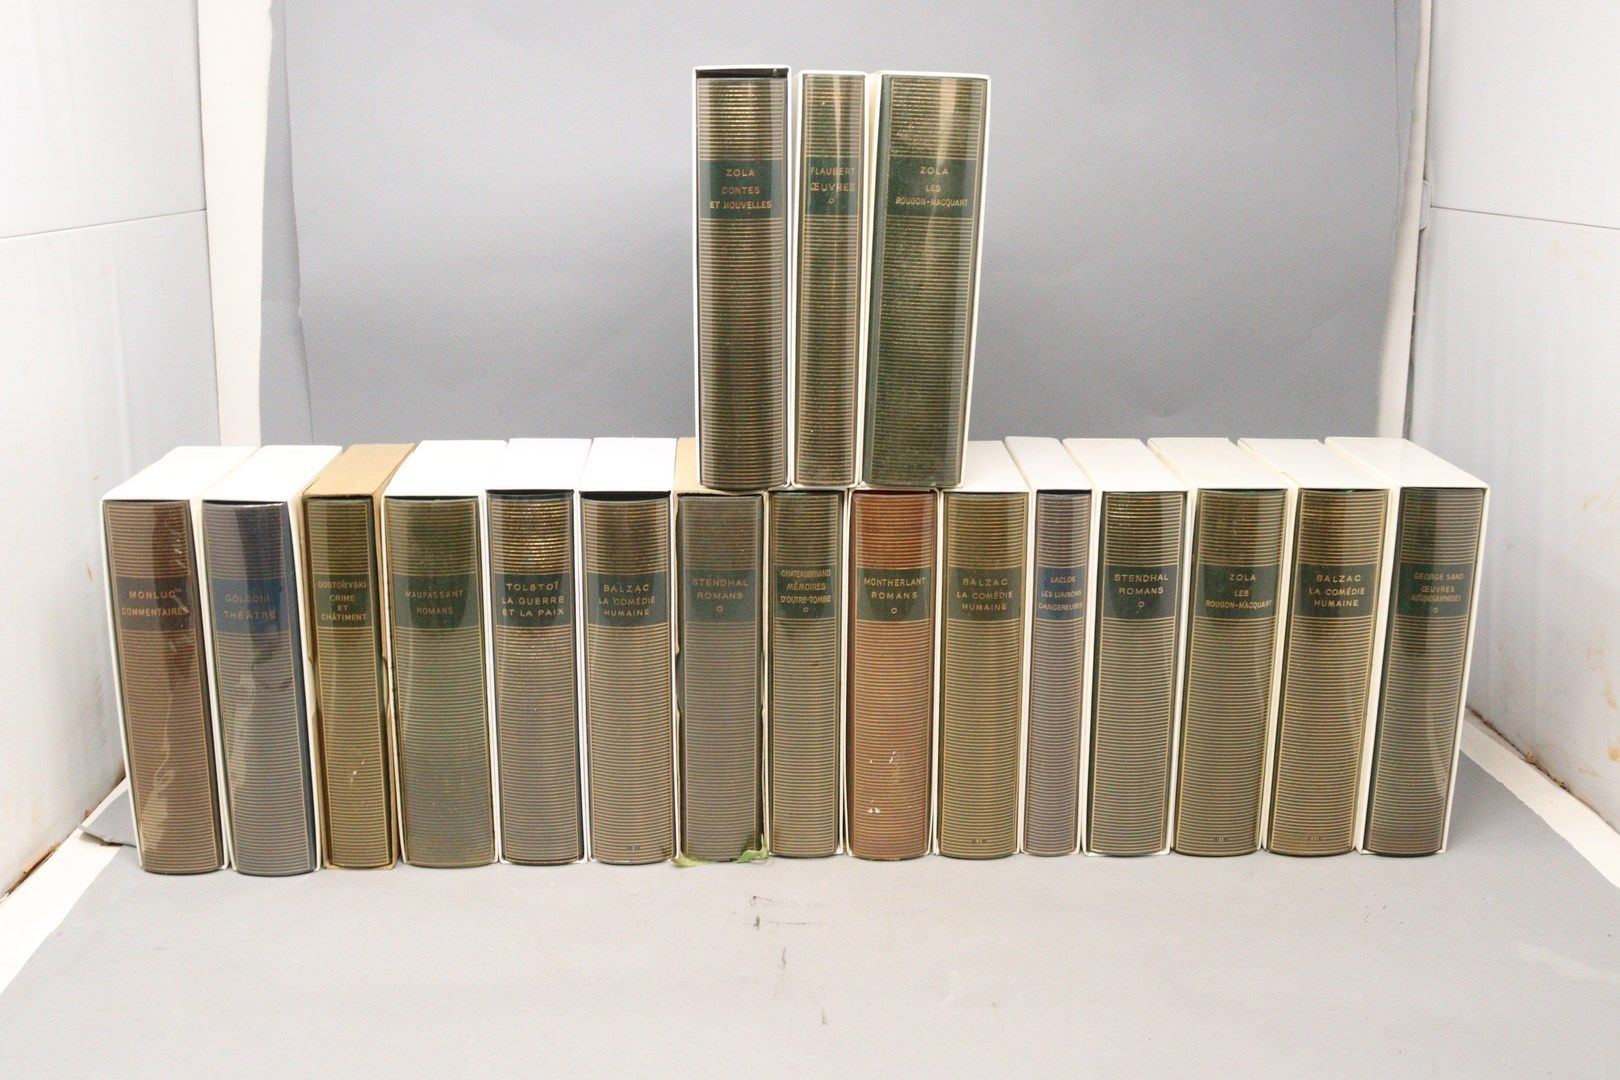 Null Strong lot of 18 Pleiades books with slipcases including:

- STENDHAL, "Rom&hellip;